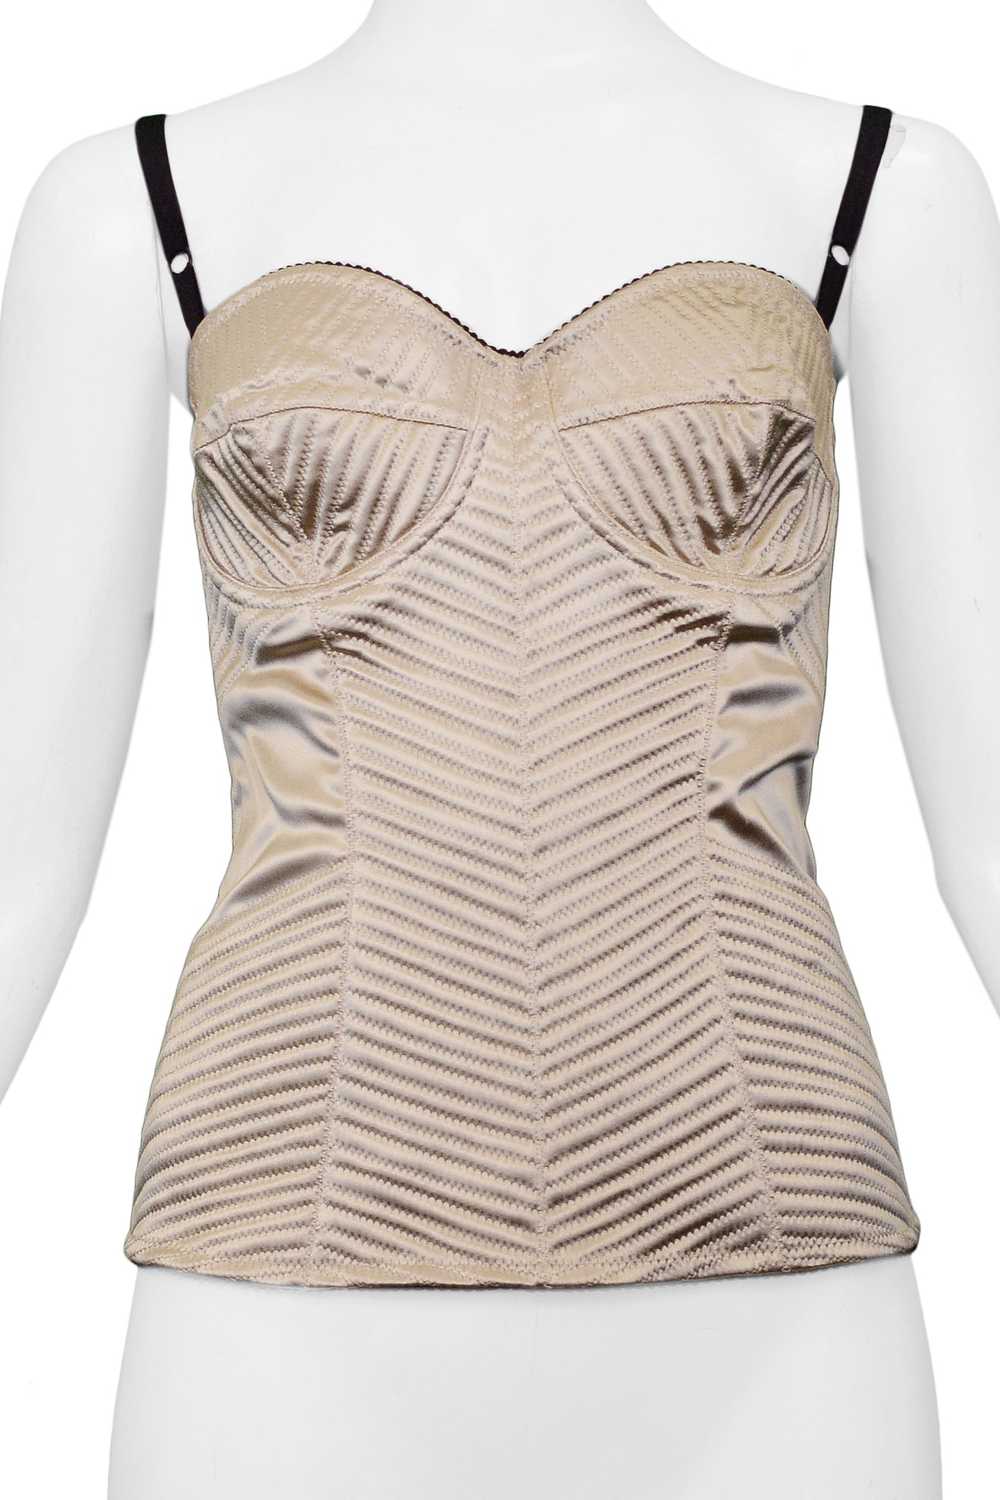 DOLCE GOLD SATIN BUSTIER CORSET TOP - image 3